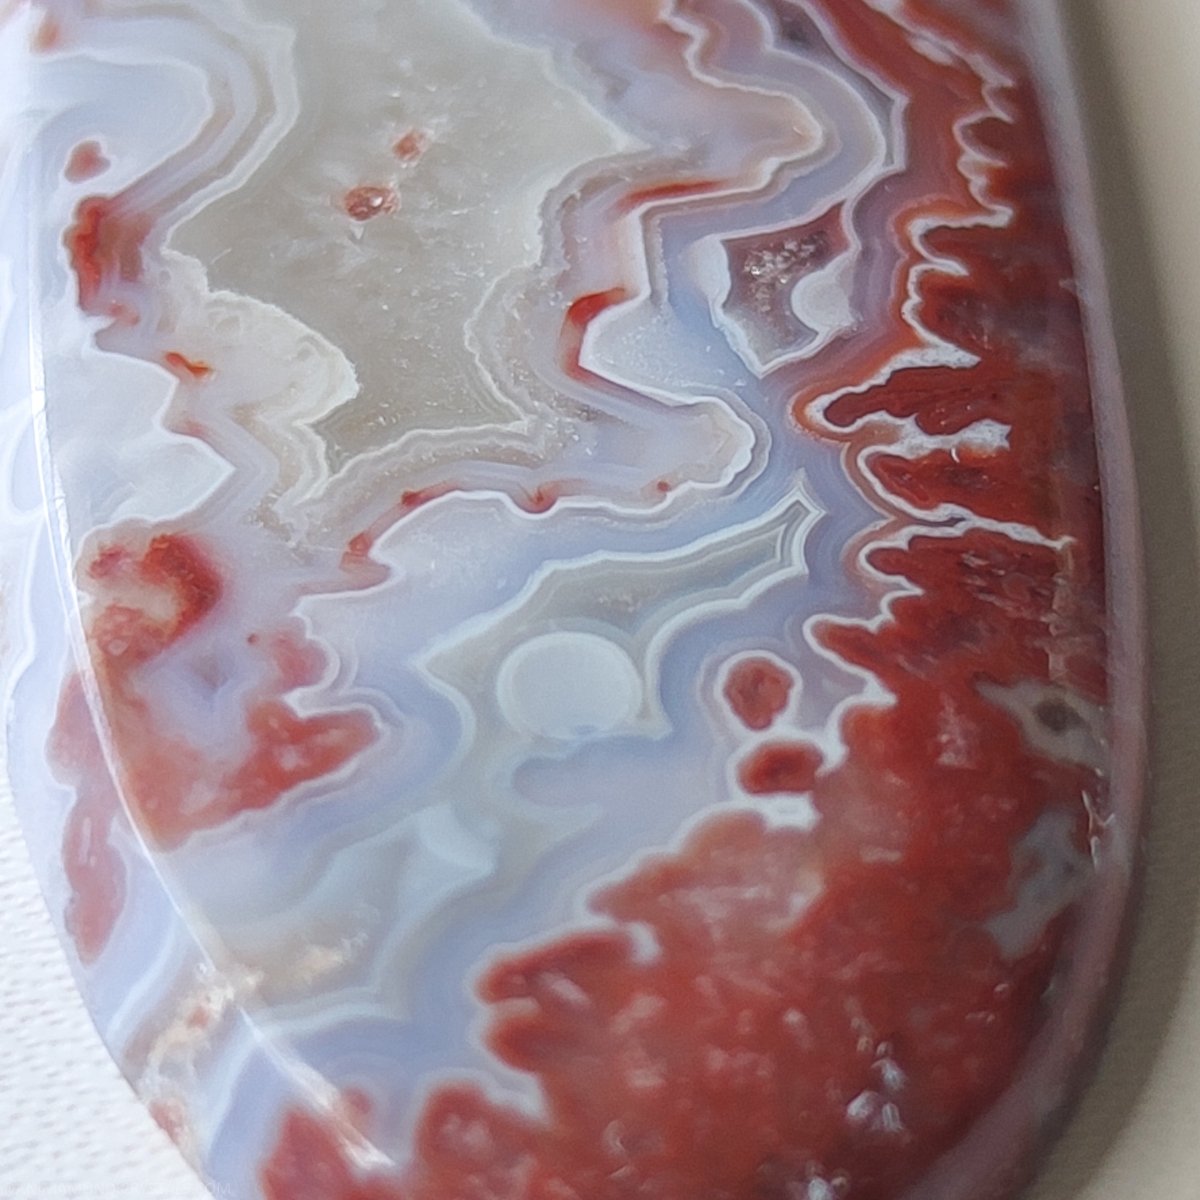 Long Oval Crazy Lace Agate N.1 - Anima Mundi Crystals